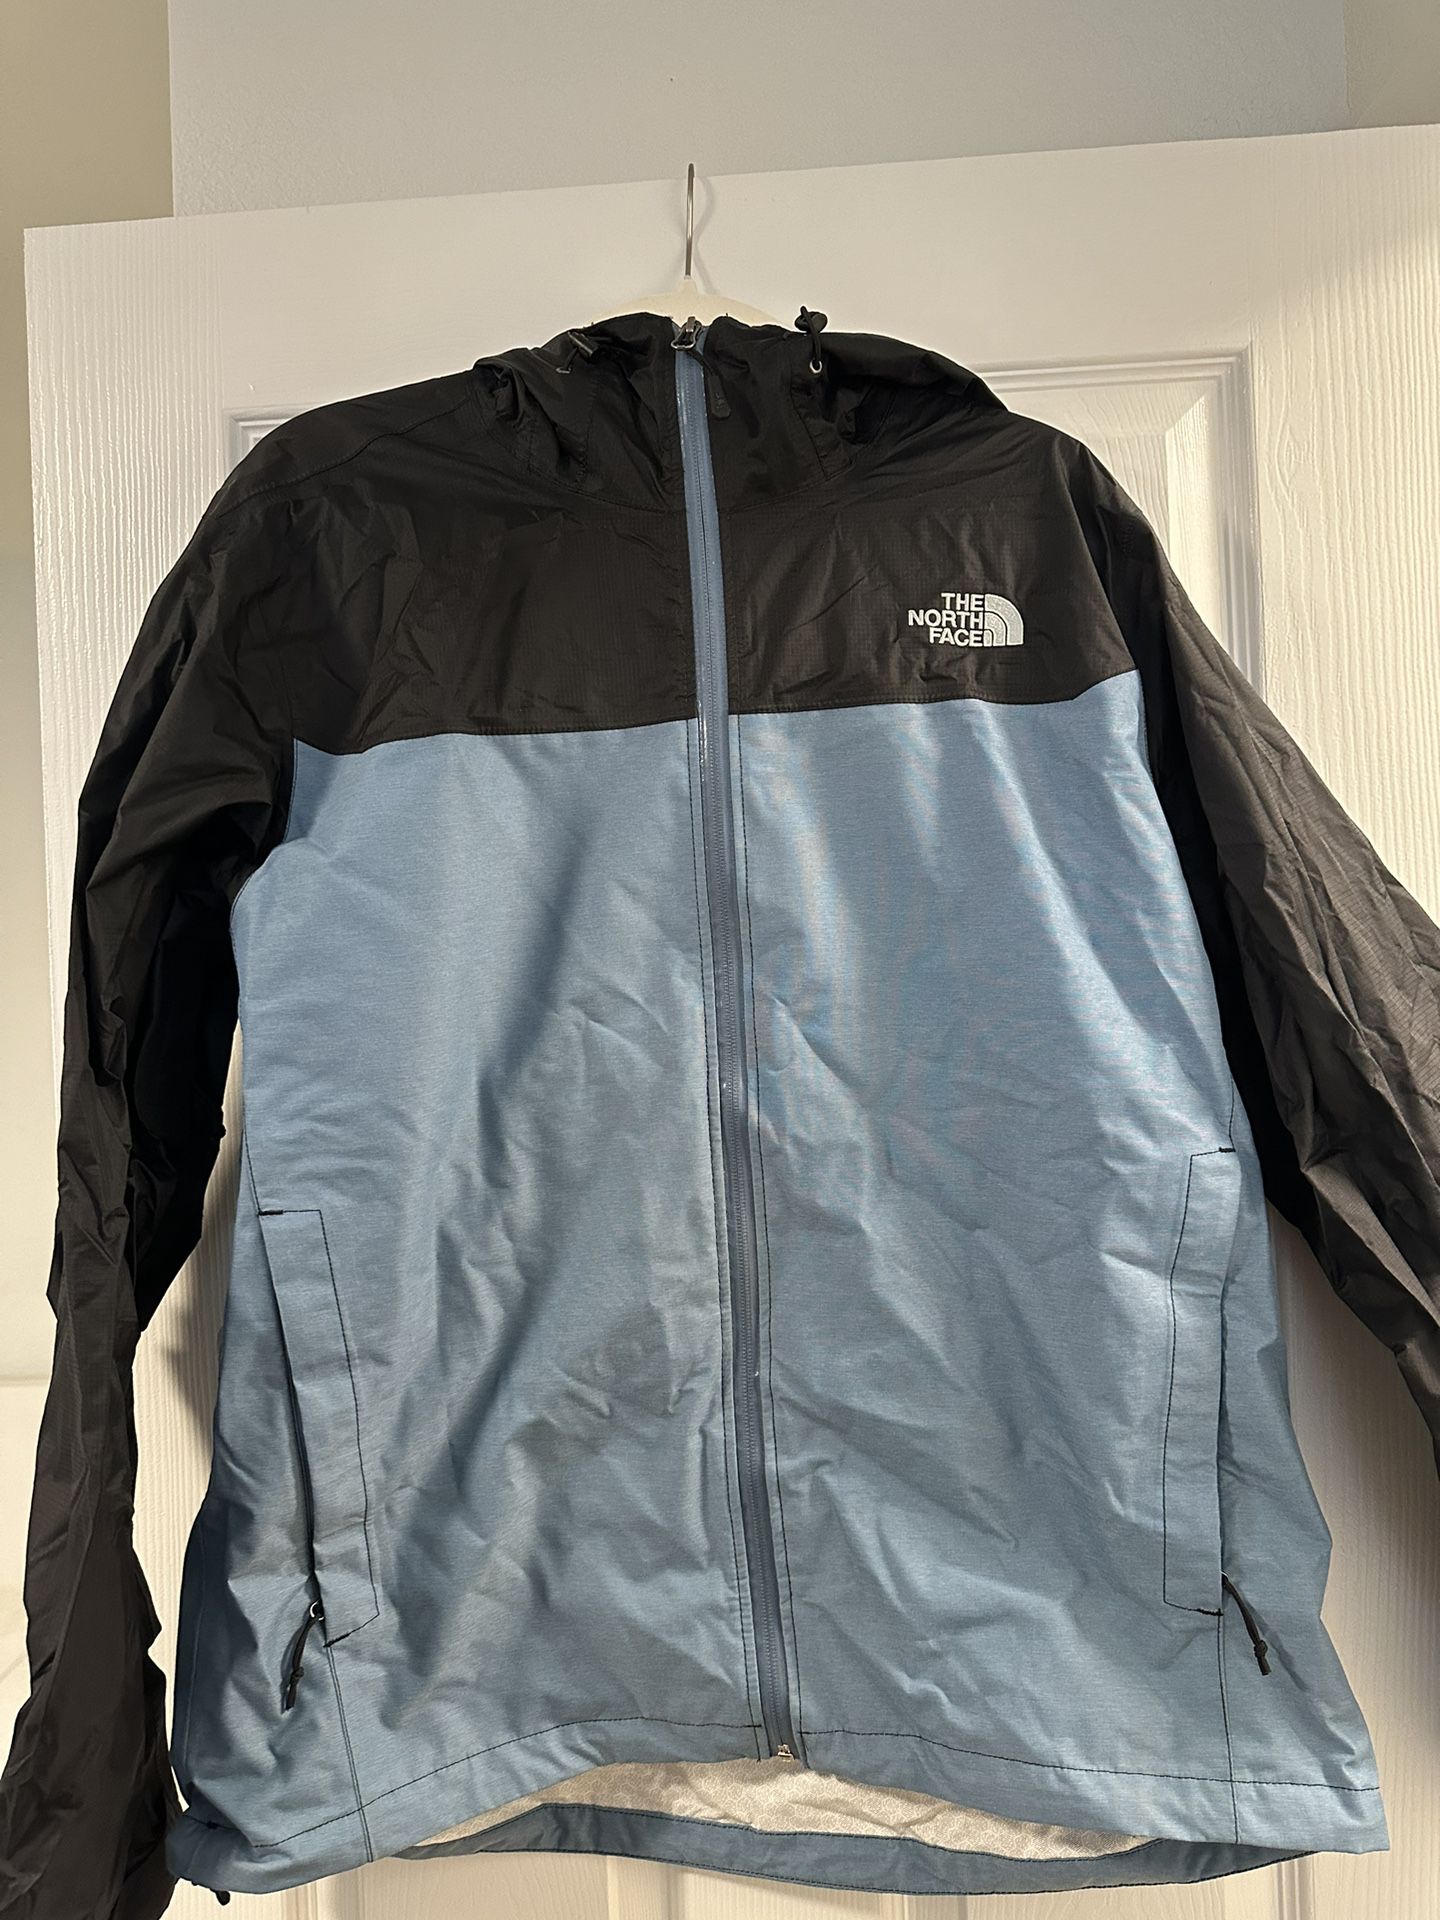 Carharrt And The North Face Jackets for Sale in Wilsonville, OR - OfferUp